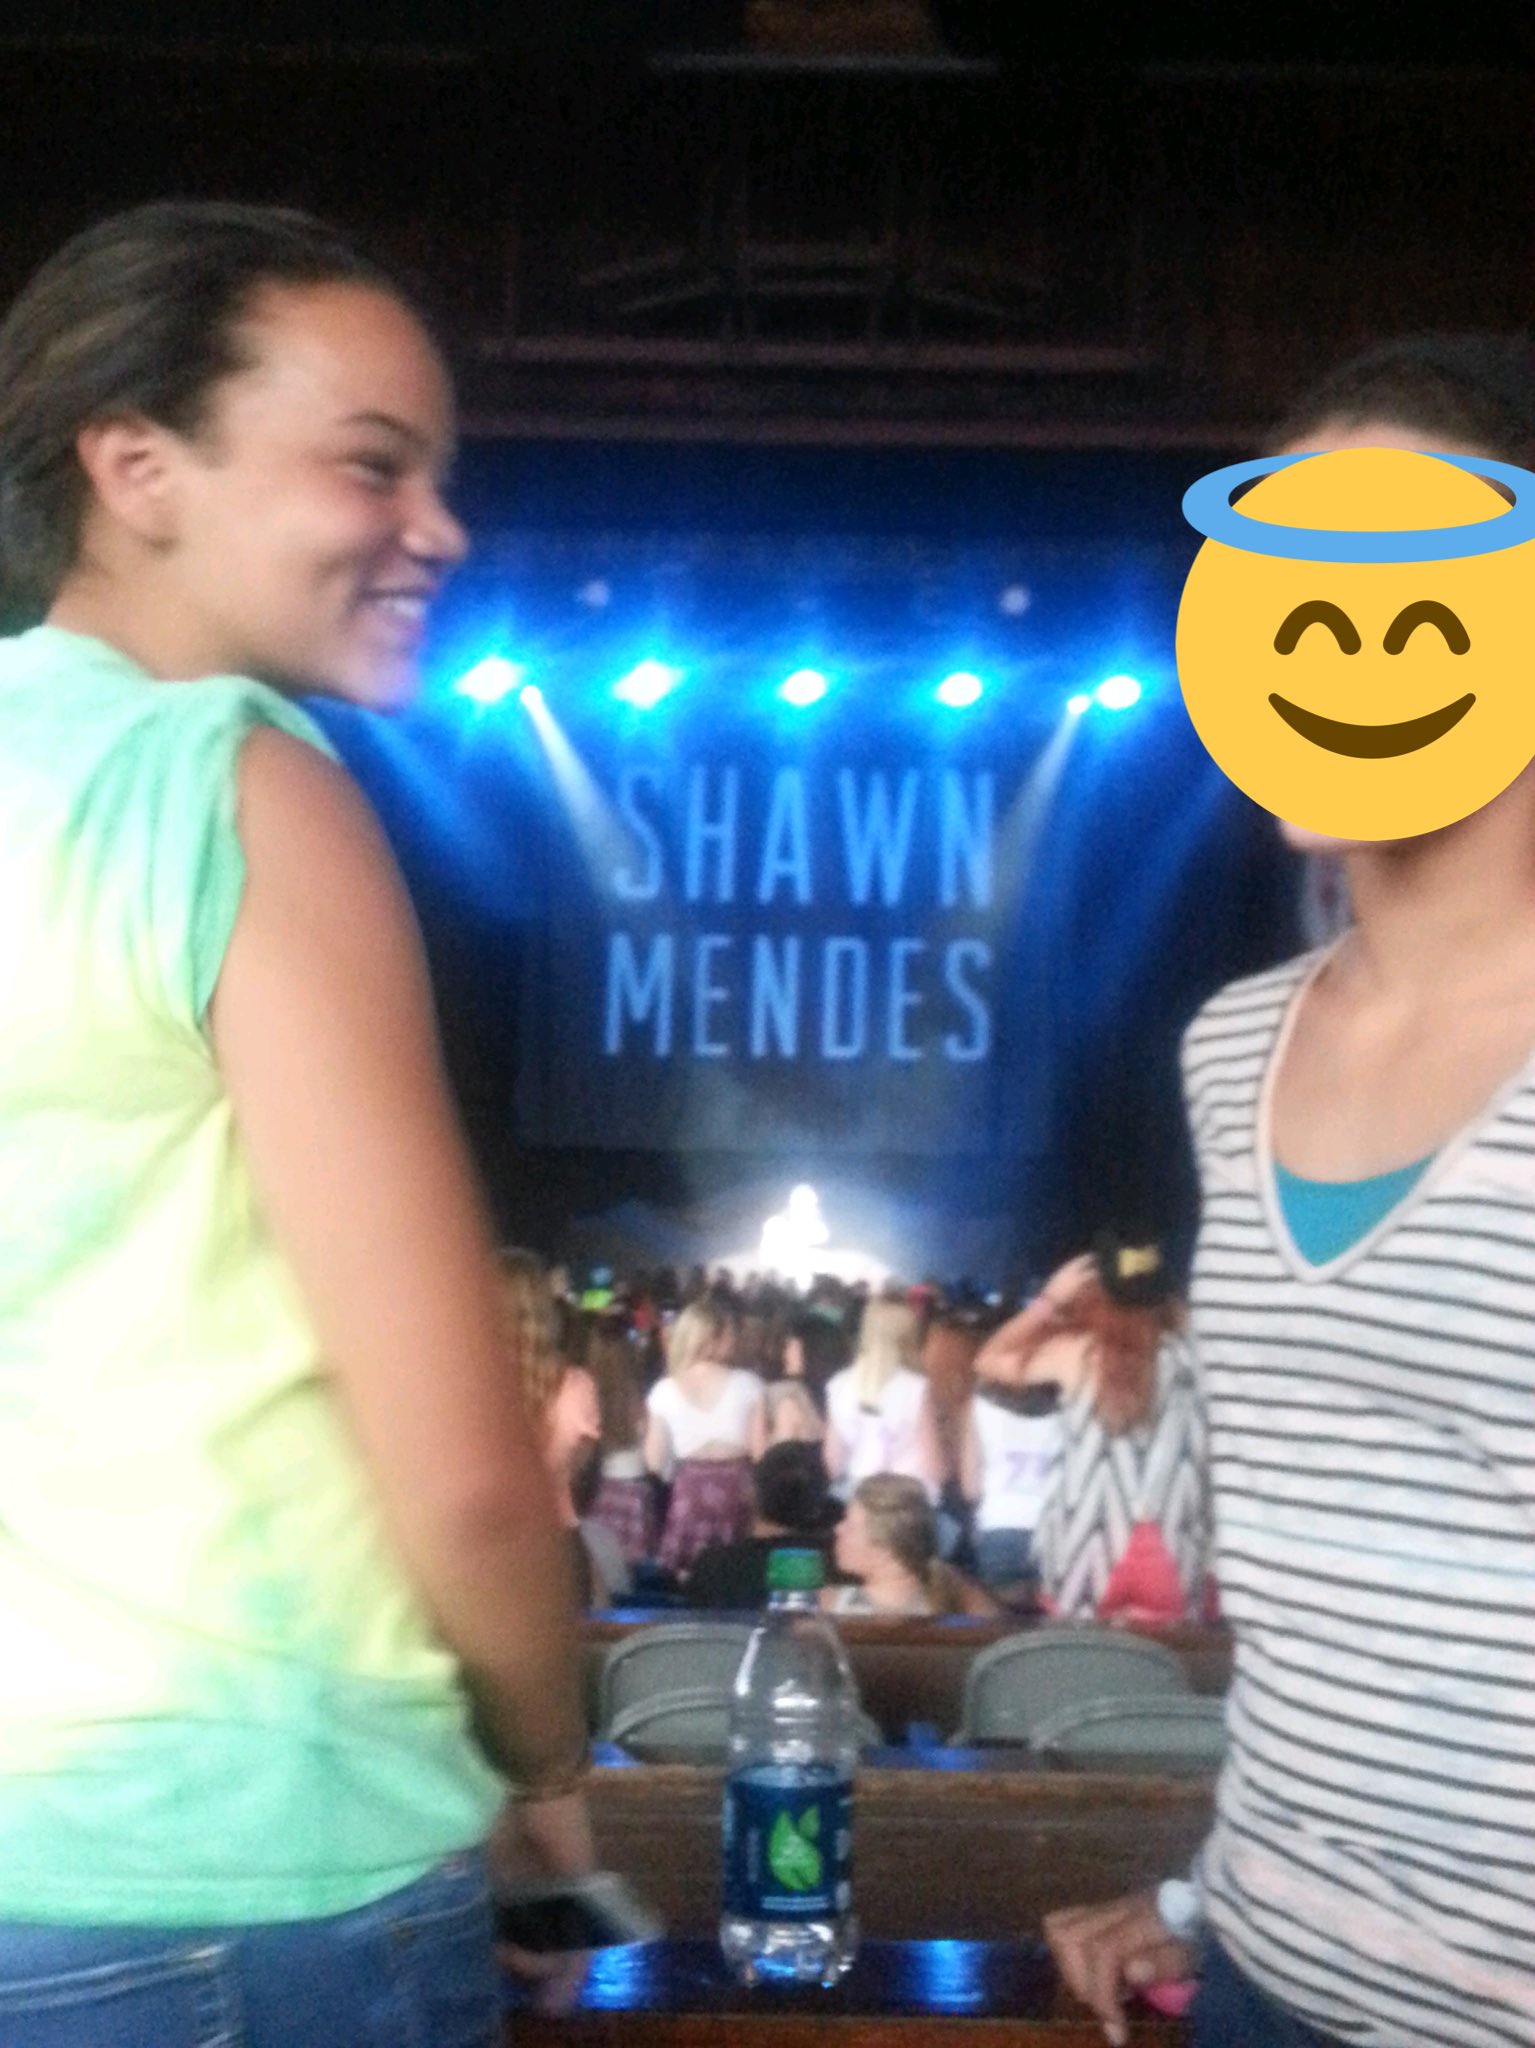 Happy birthday to me!! shawn mendes meet and greet!! 